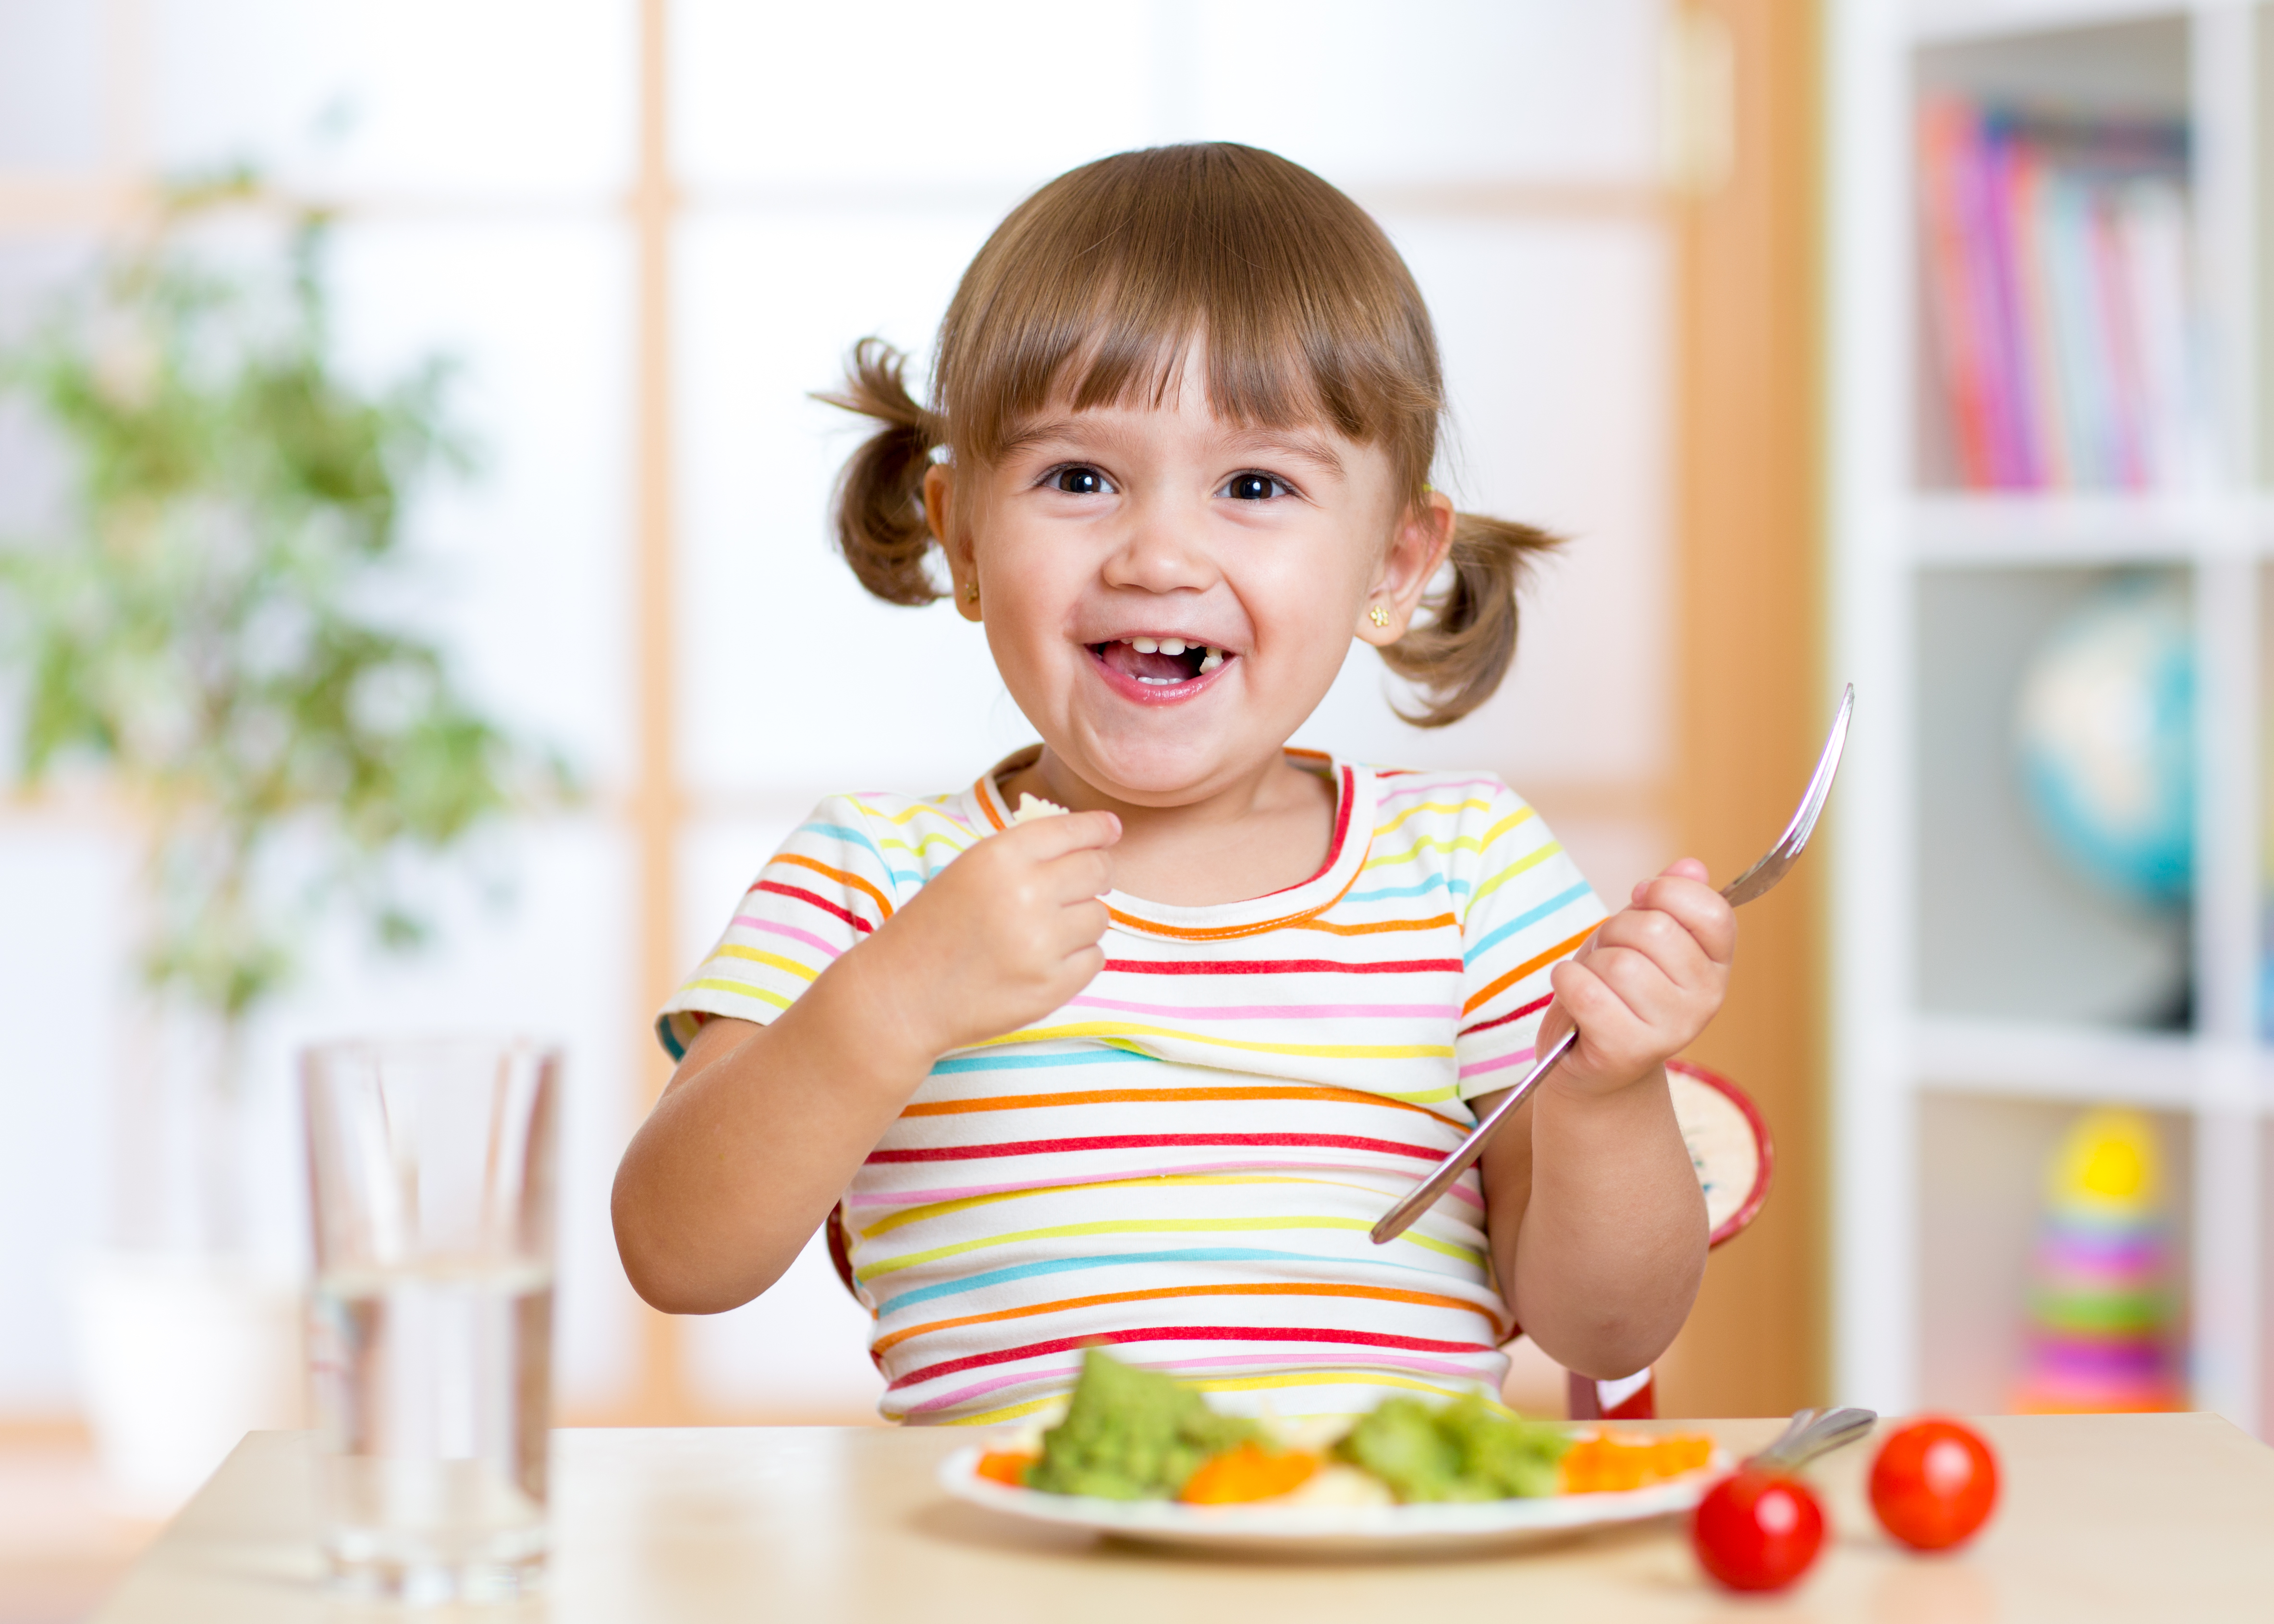 Problem__Getting Kids to Eat More Fruits and Vegetables